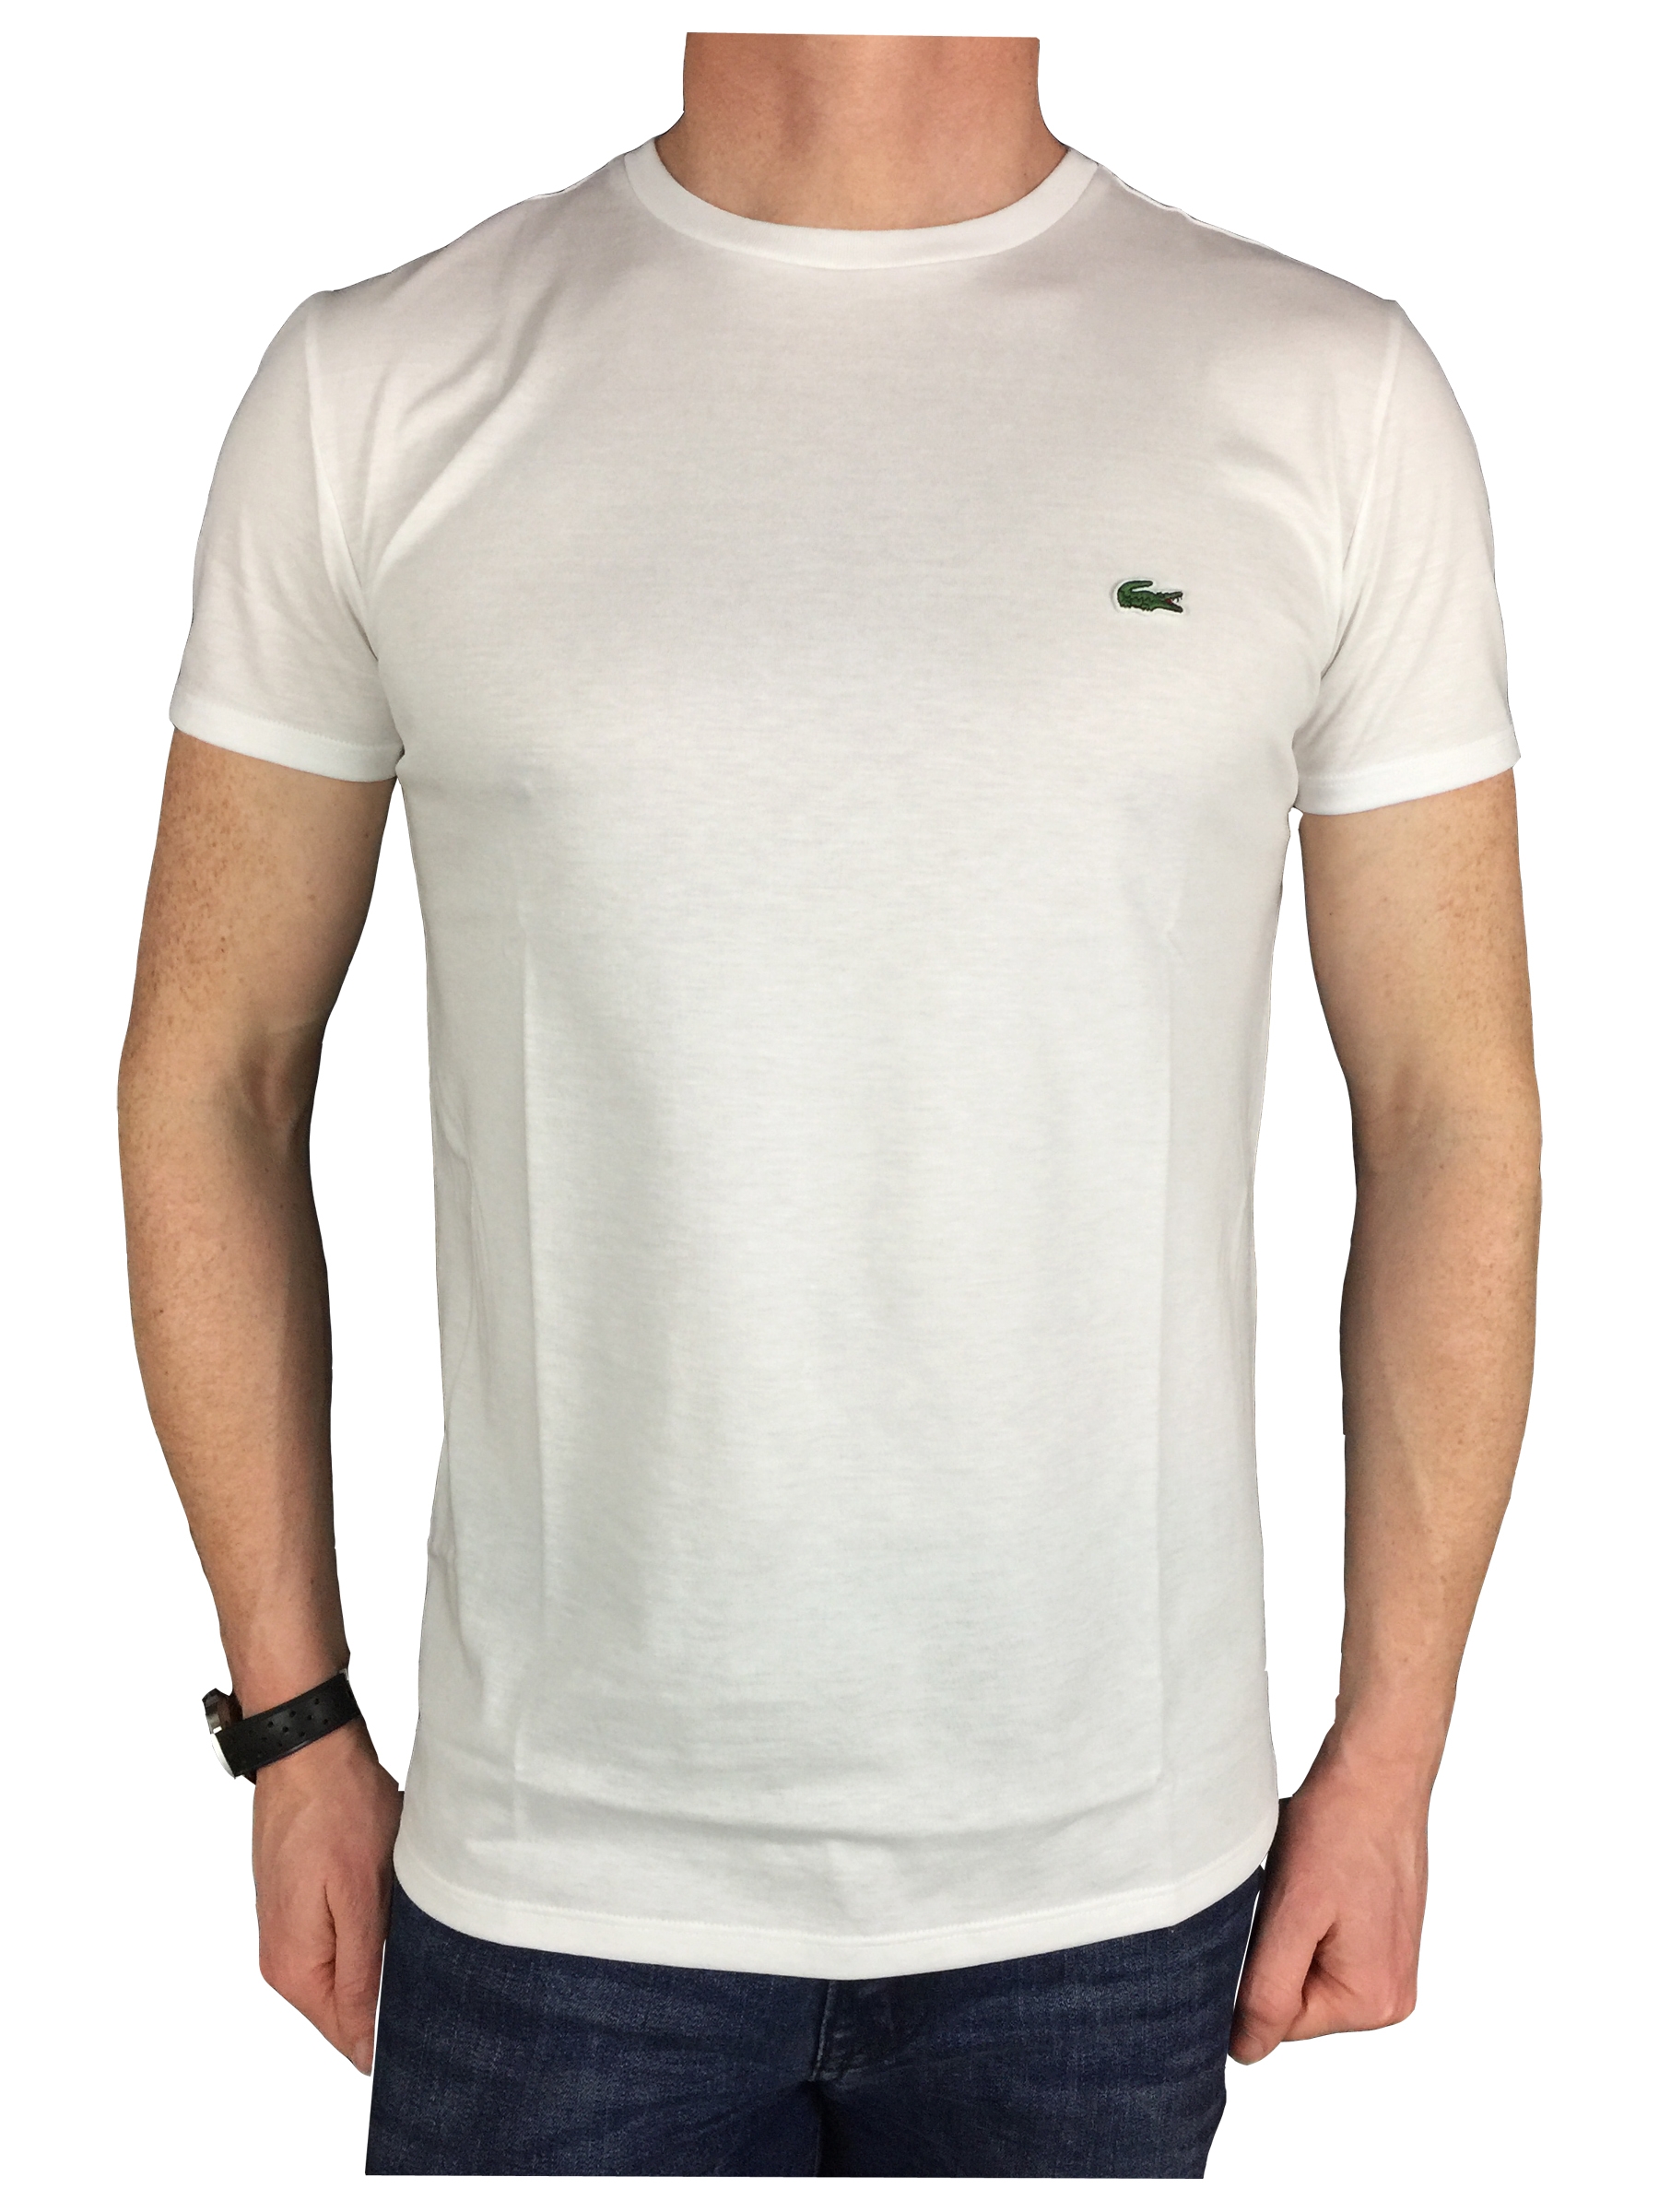 Lacoste Th6709 Neck T-shirt for sale online | eBay